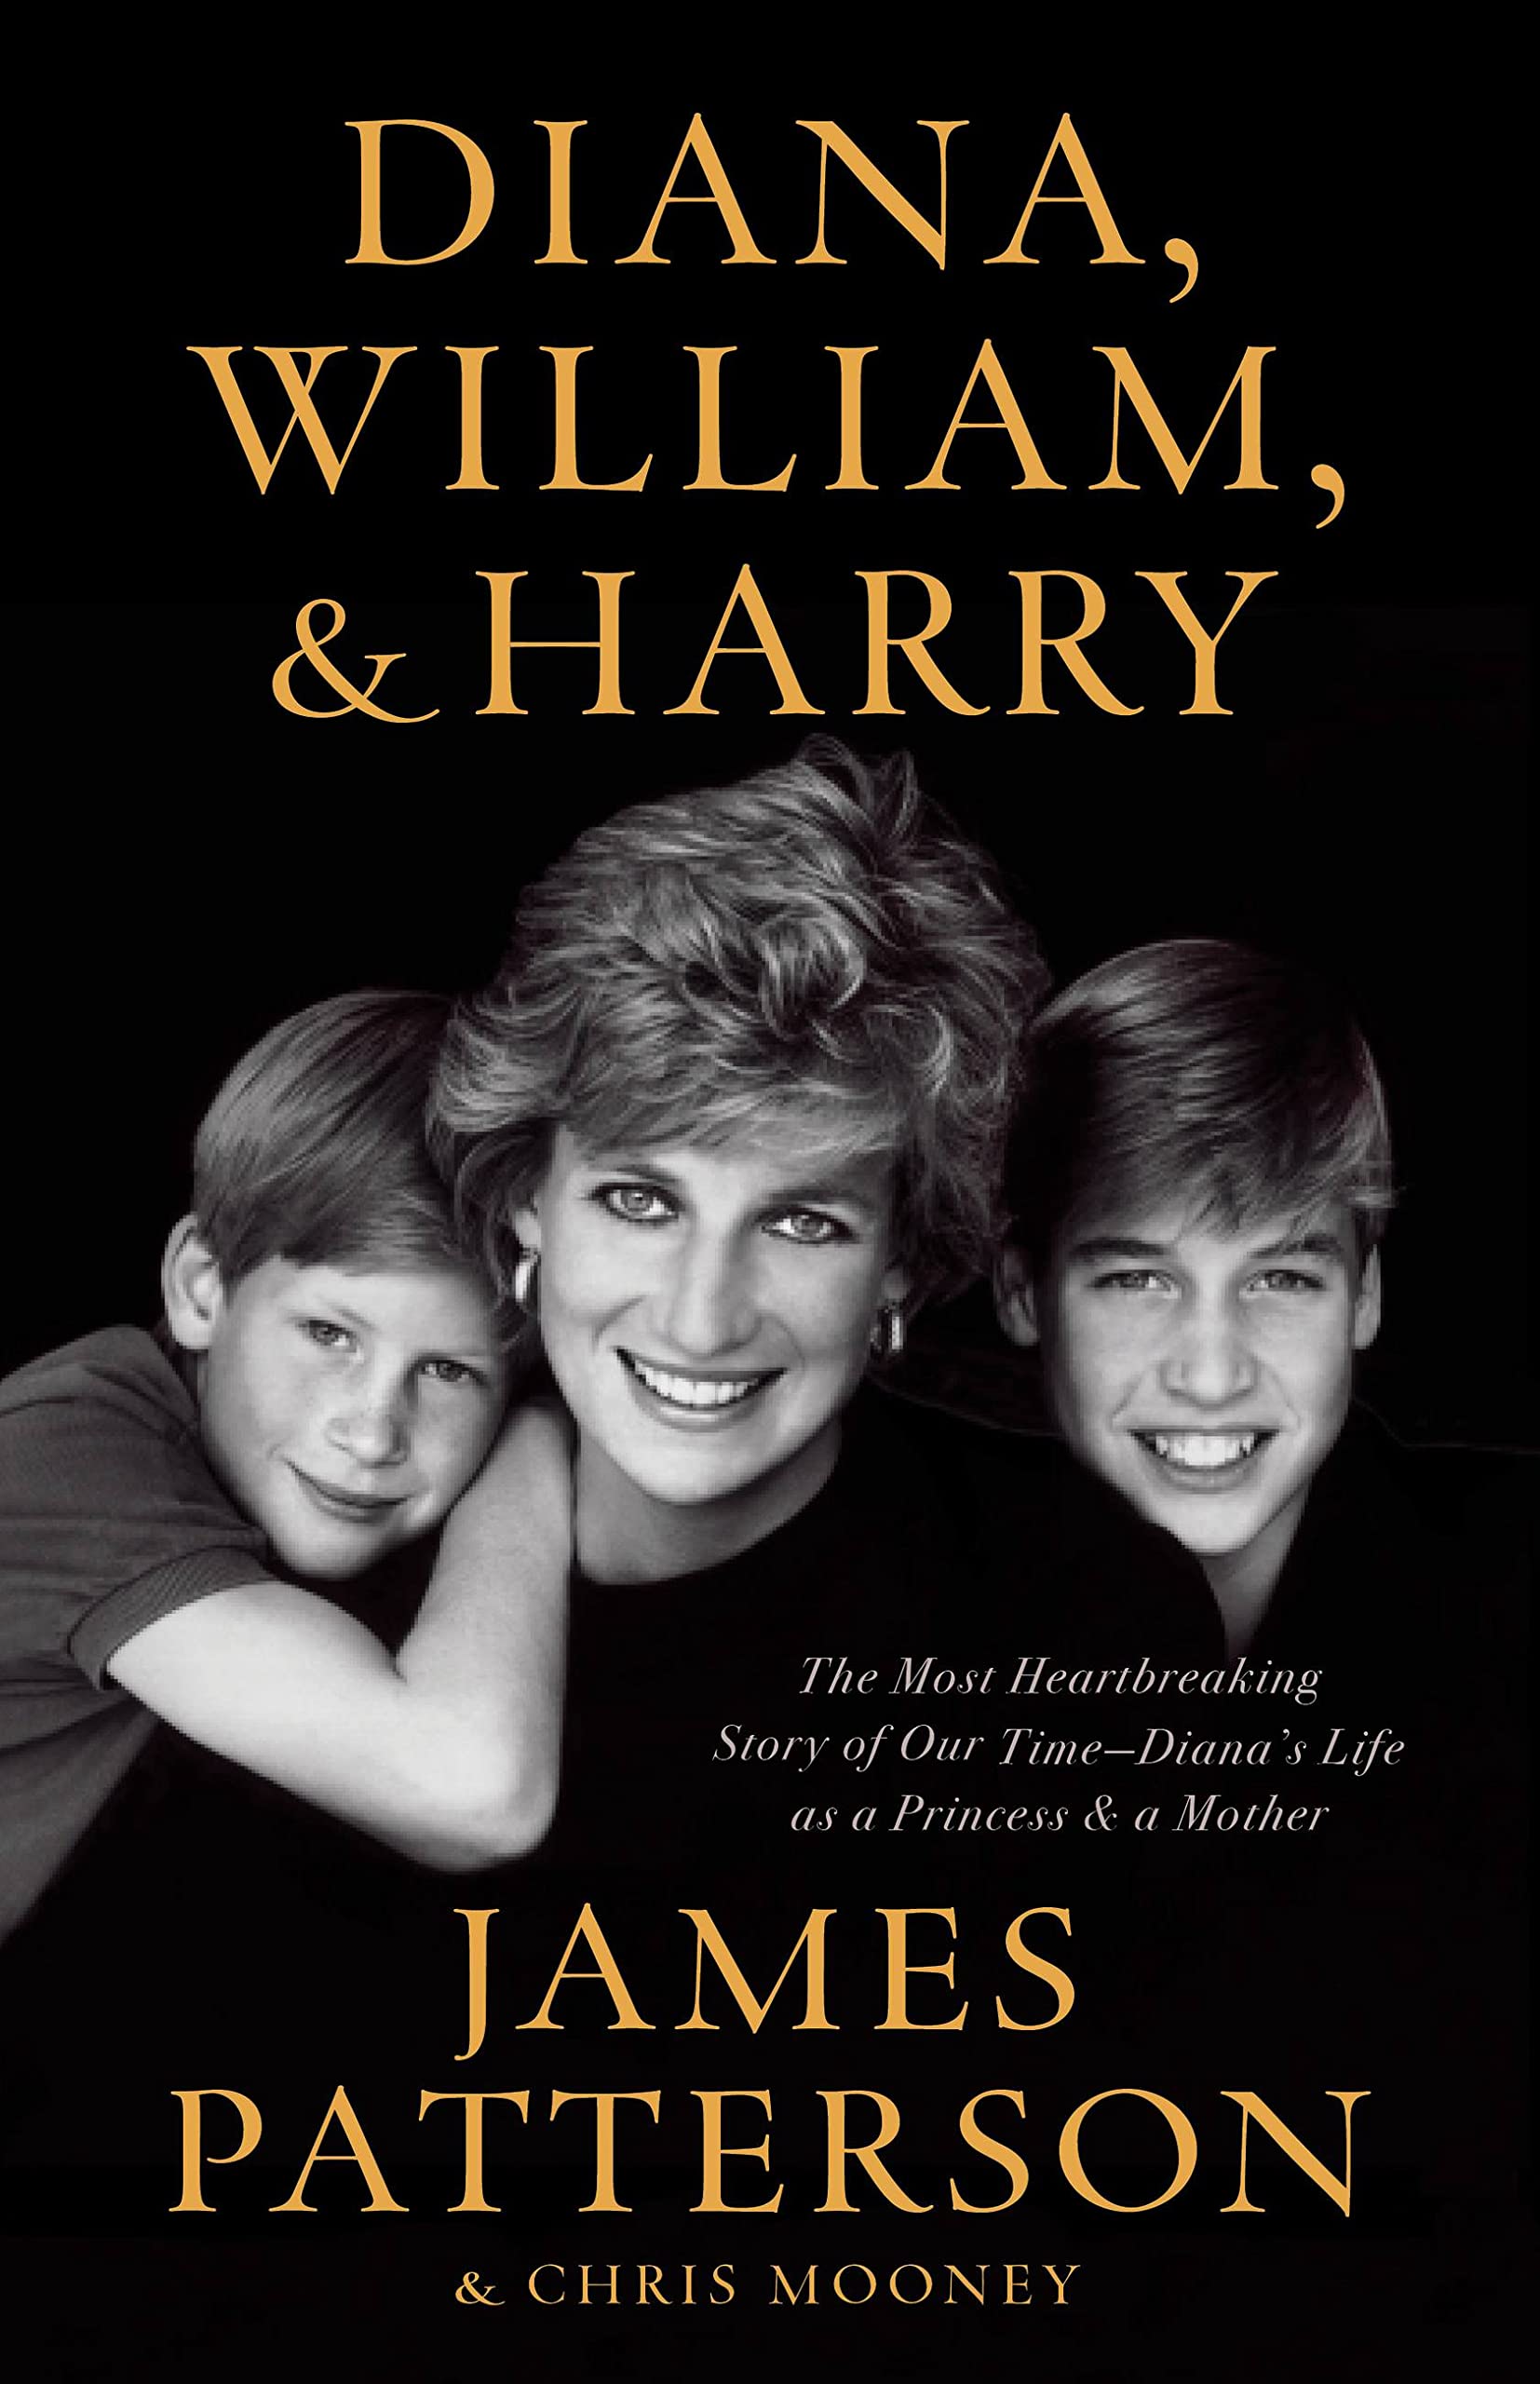 Image for "Diana, William and Harry"